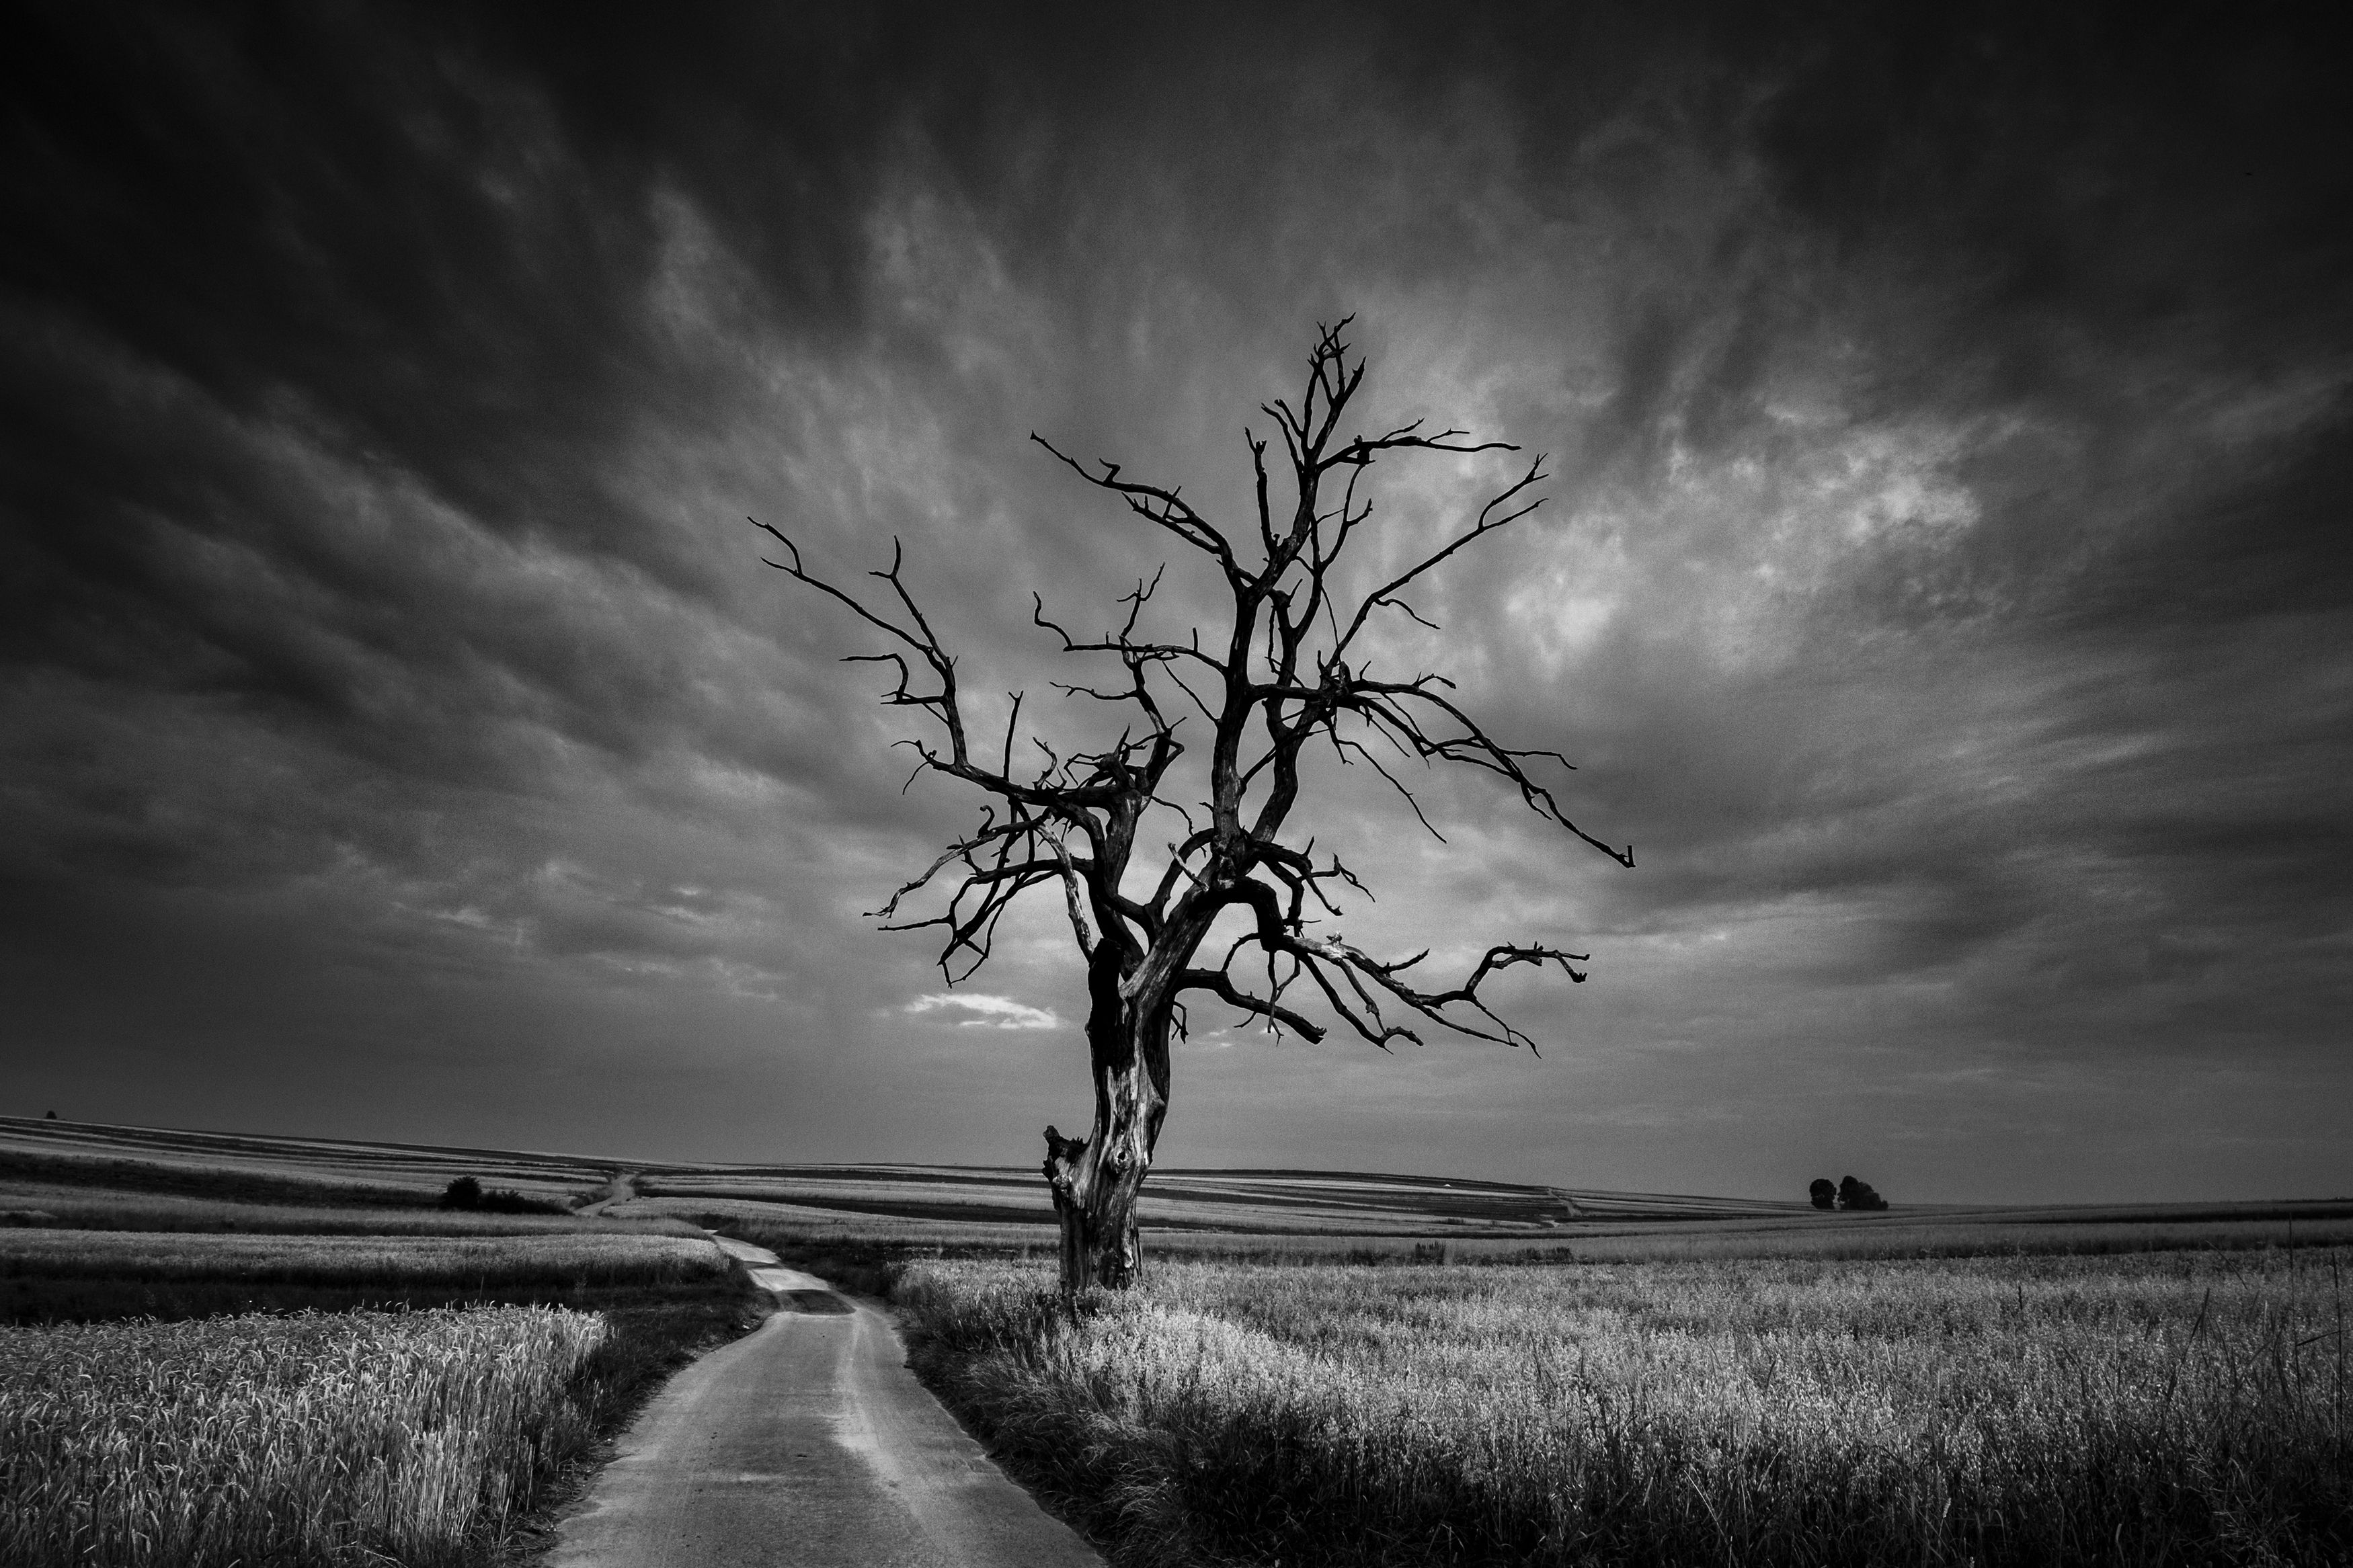 day, horizontal, photography, tree, nature, landscape, tranquil, sky, agricultural, field, cloud, grass, monochrome, road, rural, Damian Cyfka